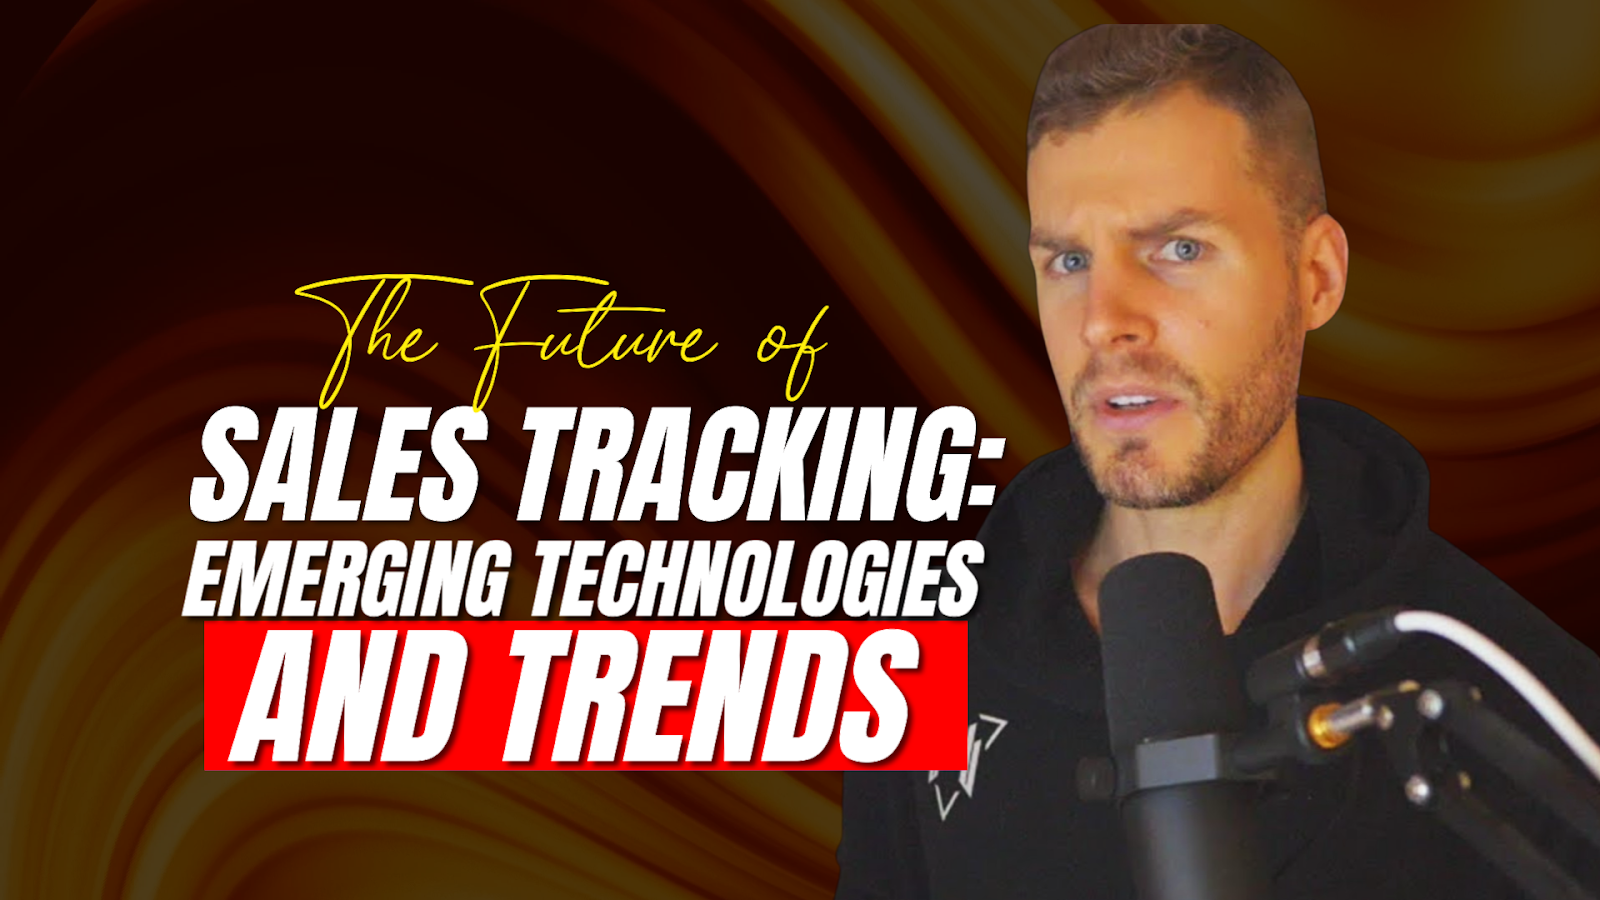 The Future of Sales Tracking: Emerging Technologies and Trends